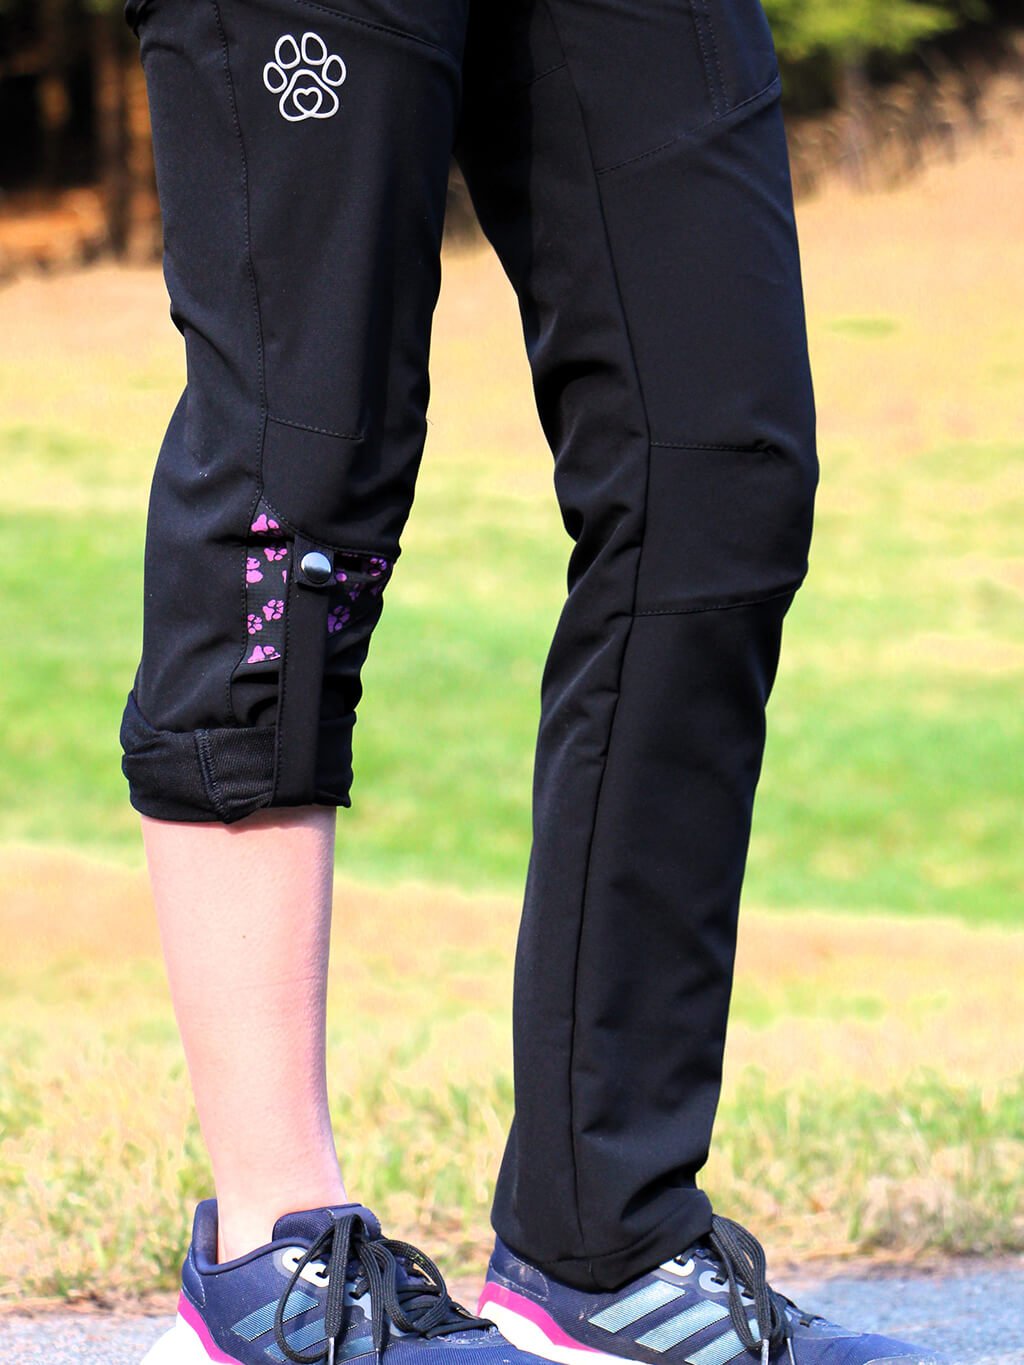 Ladies spring training pants - black with turquoise paws